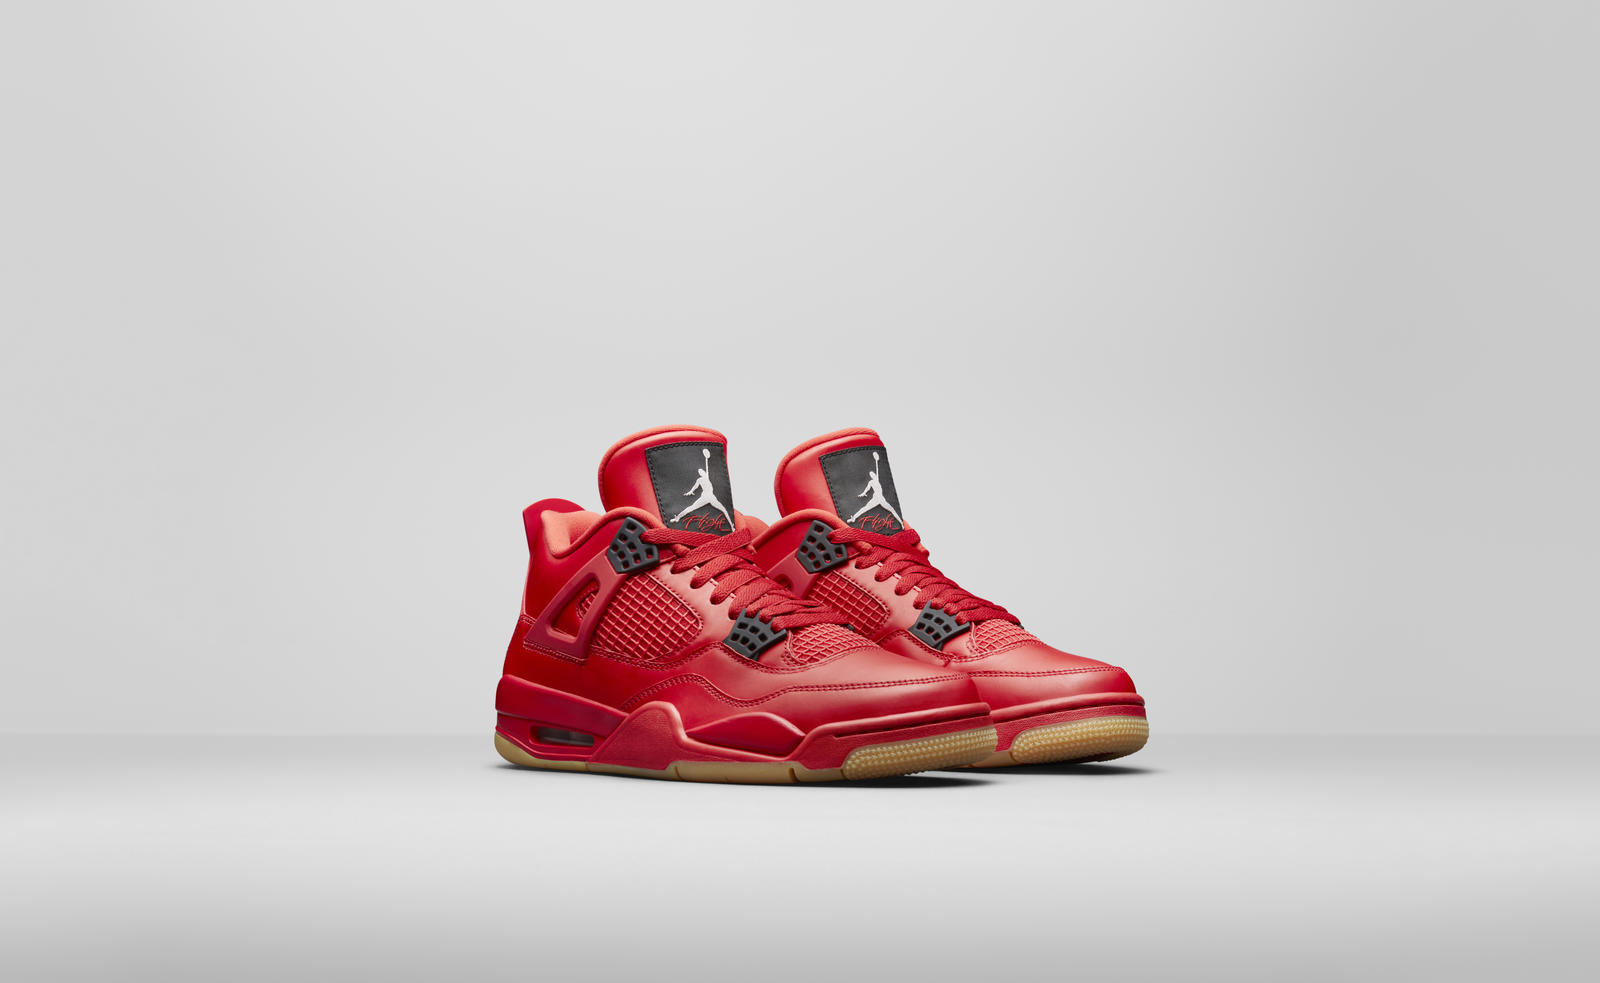 Here is the first look at the women s Air Jordan 4 NRG Hot Punch that drops  early January - Lobster Red / Gym Red – Cheap Ietp Jordan Outlet - Jordan  Essentials Hoodie M